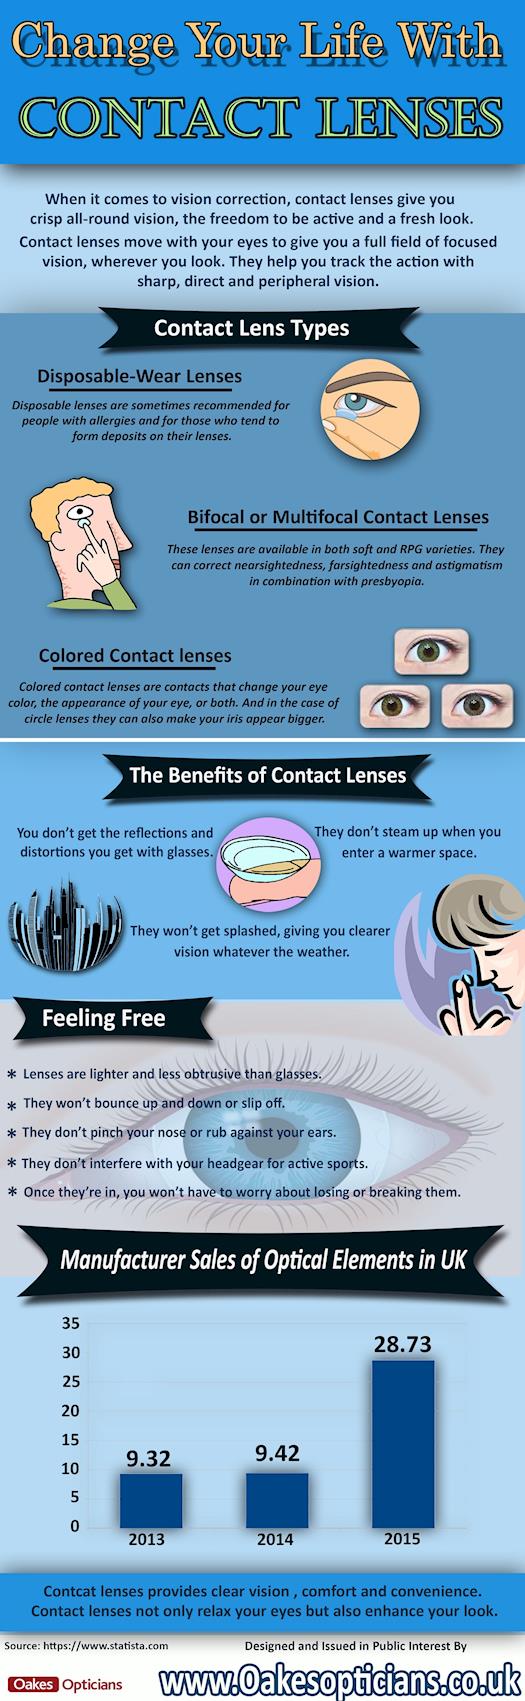 Change Your Life With Contact Lenses